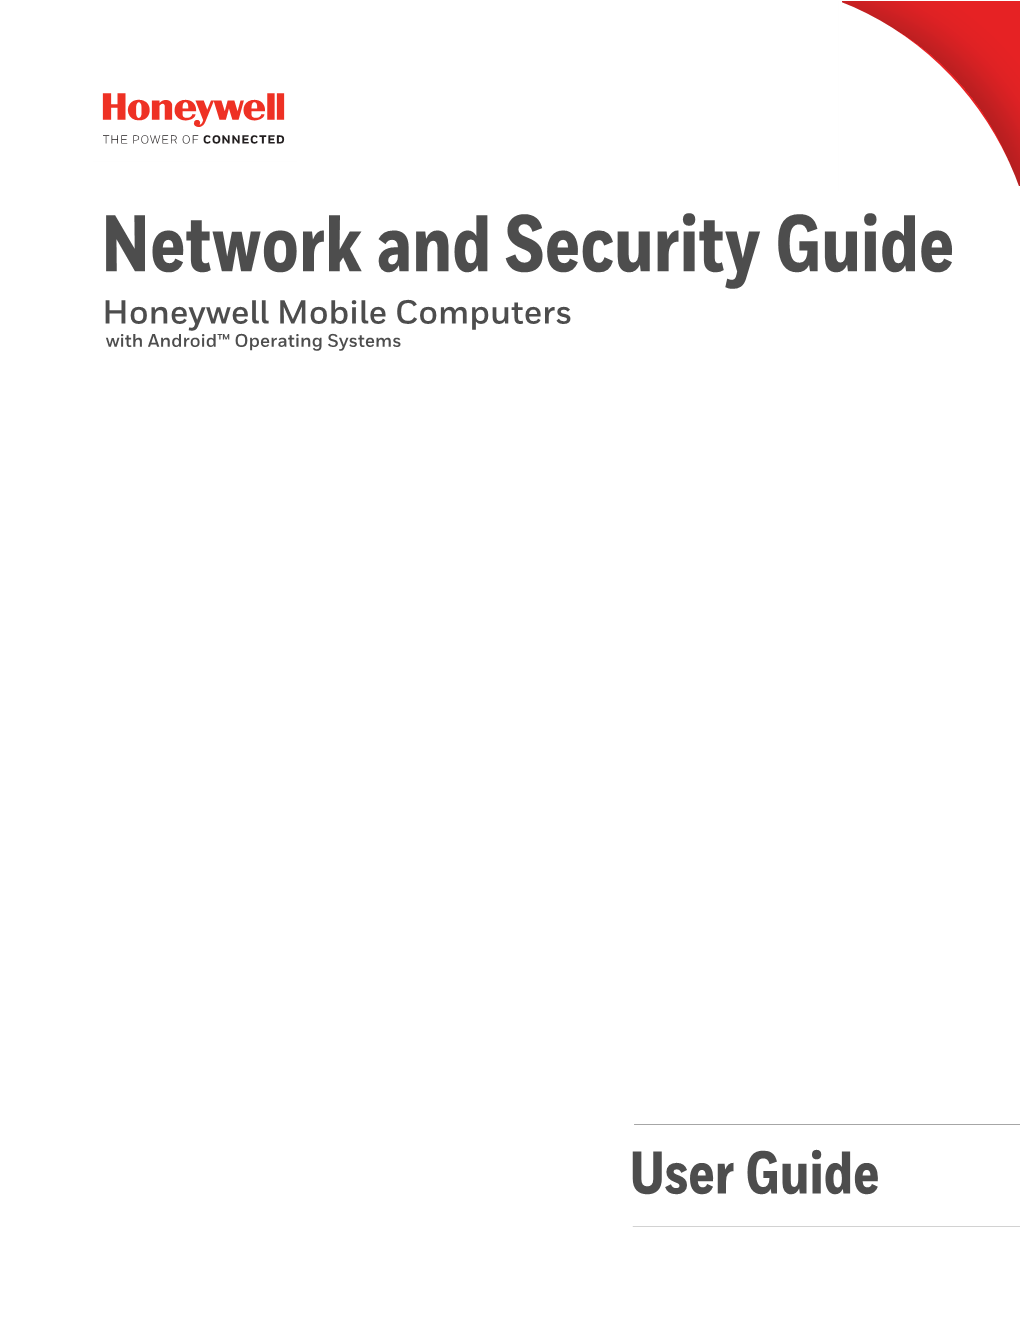 Network and Security Guide for Honeywell Mobile Computers With